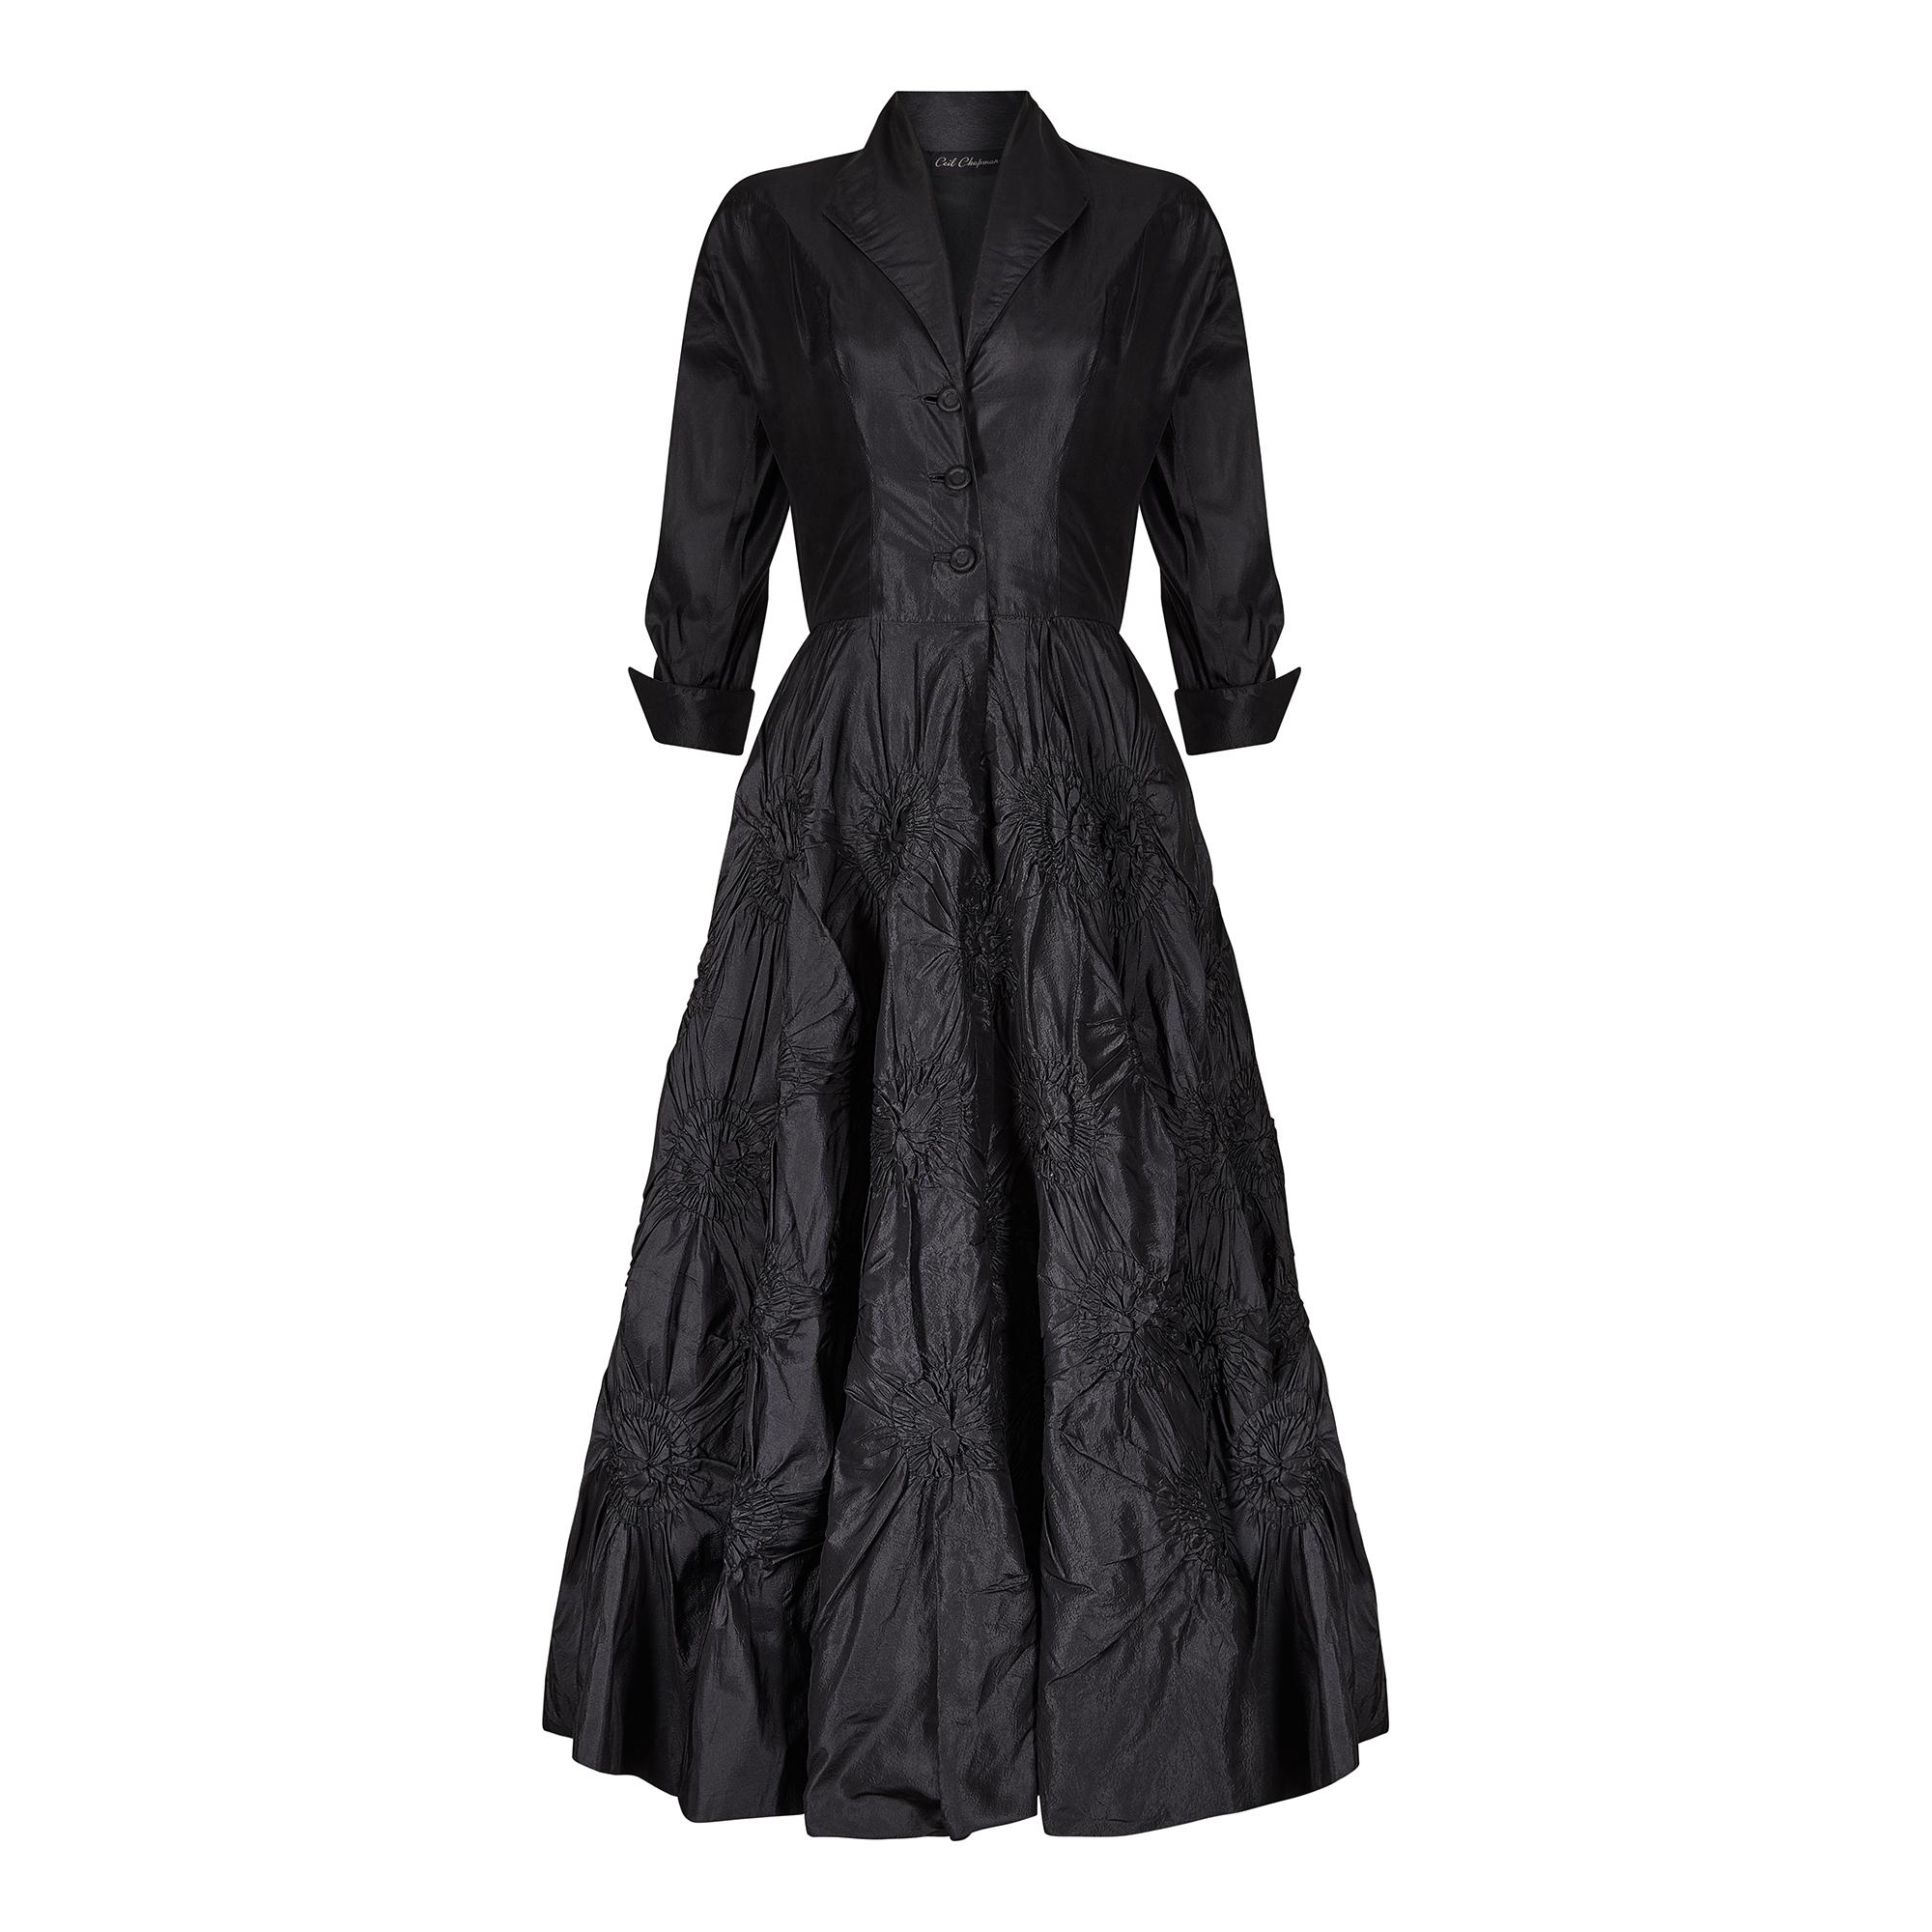 This is a brilliant example of Ceil Chapman's early work from the late 1940s to early 1950s and the black taffeta silk design is exquisite. Its the first thing you notice about this dress which has the most unusual construction. The skirt's textured